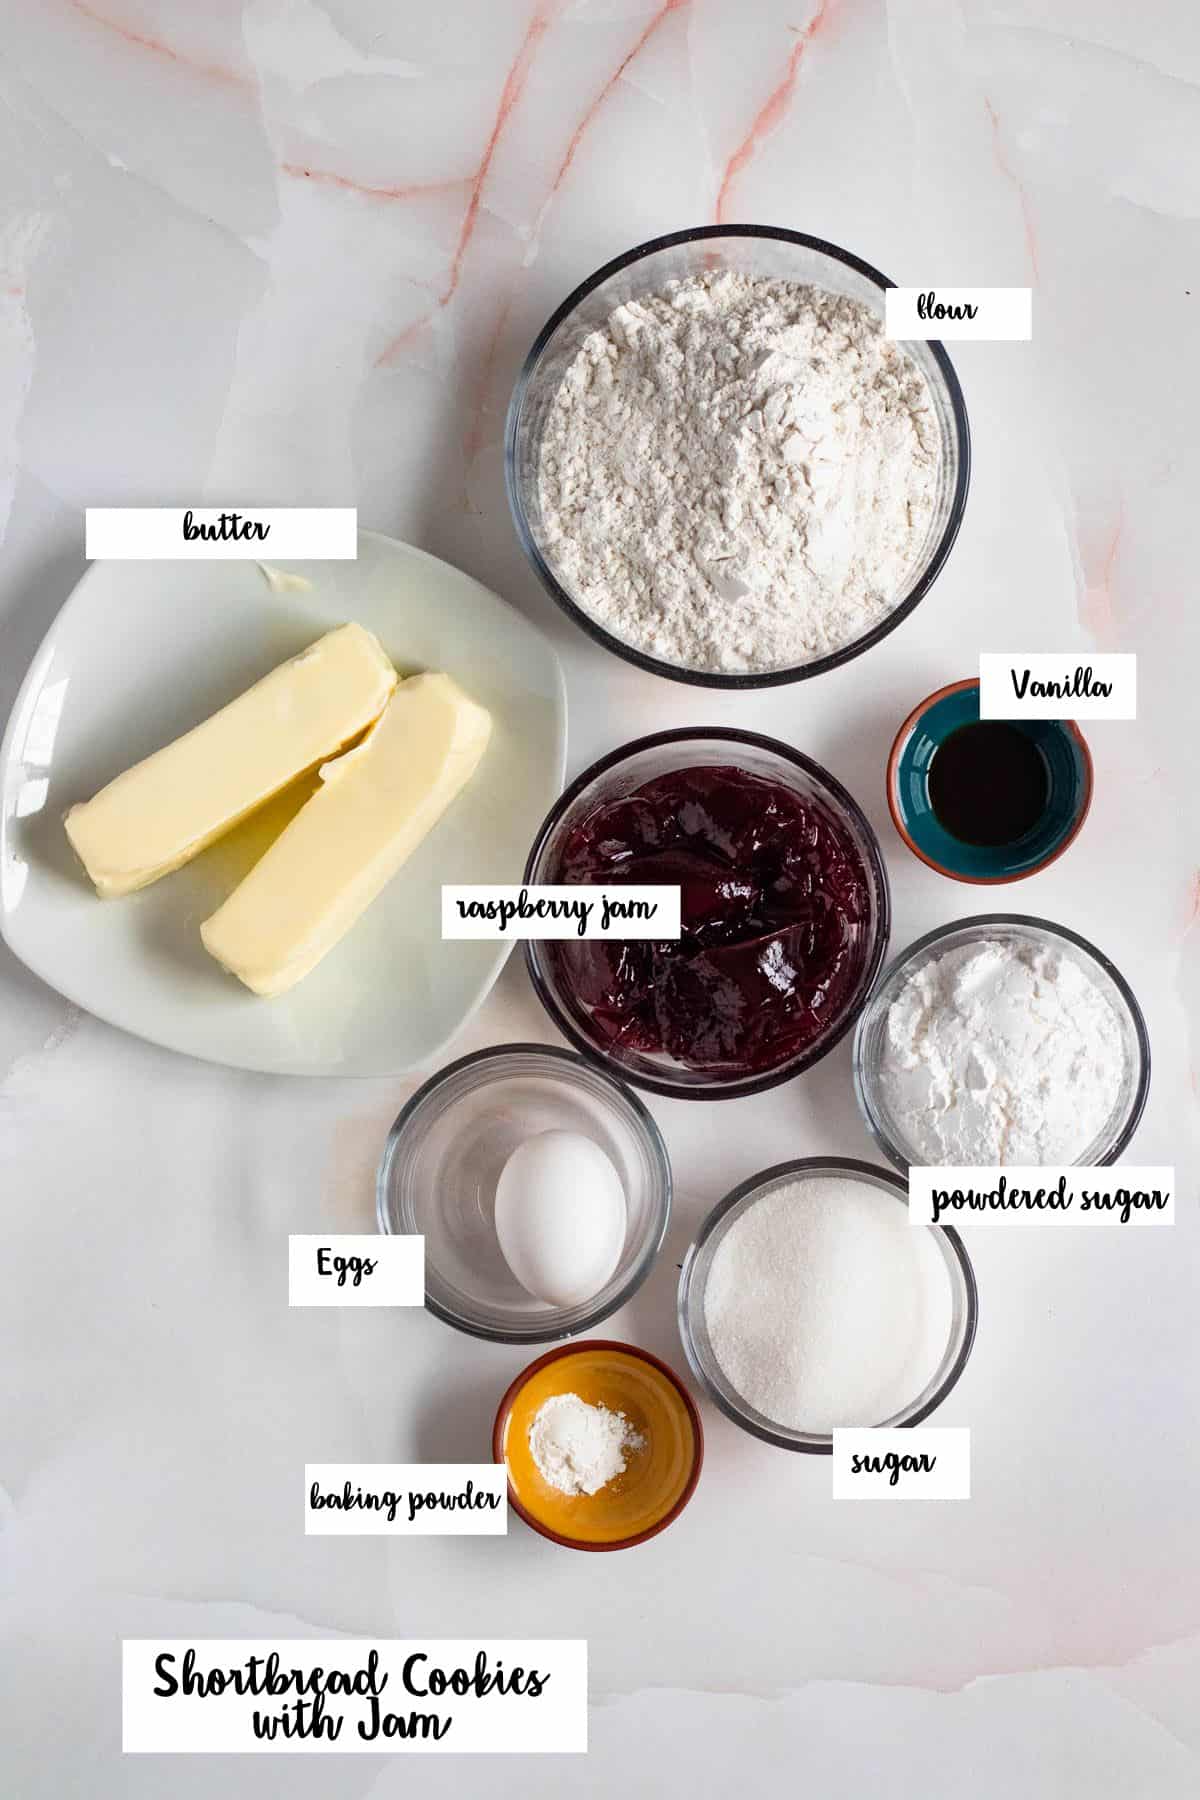 Iingredients shown are used to prepare sables, or shortbread cookies with jam.